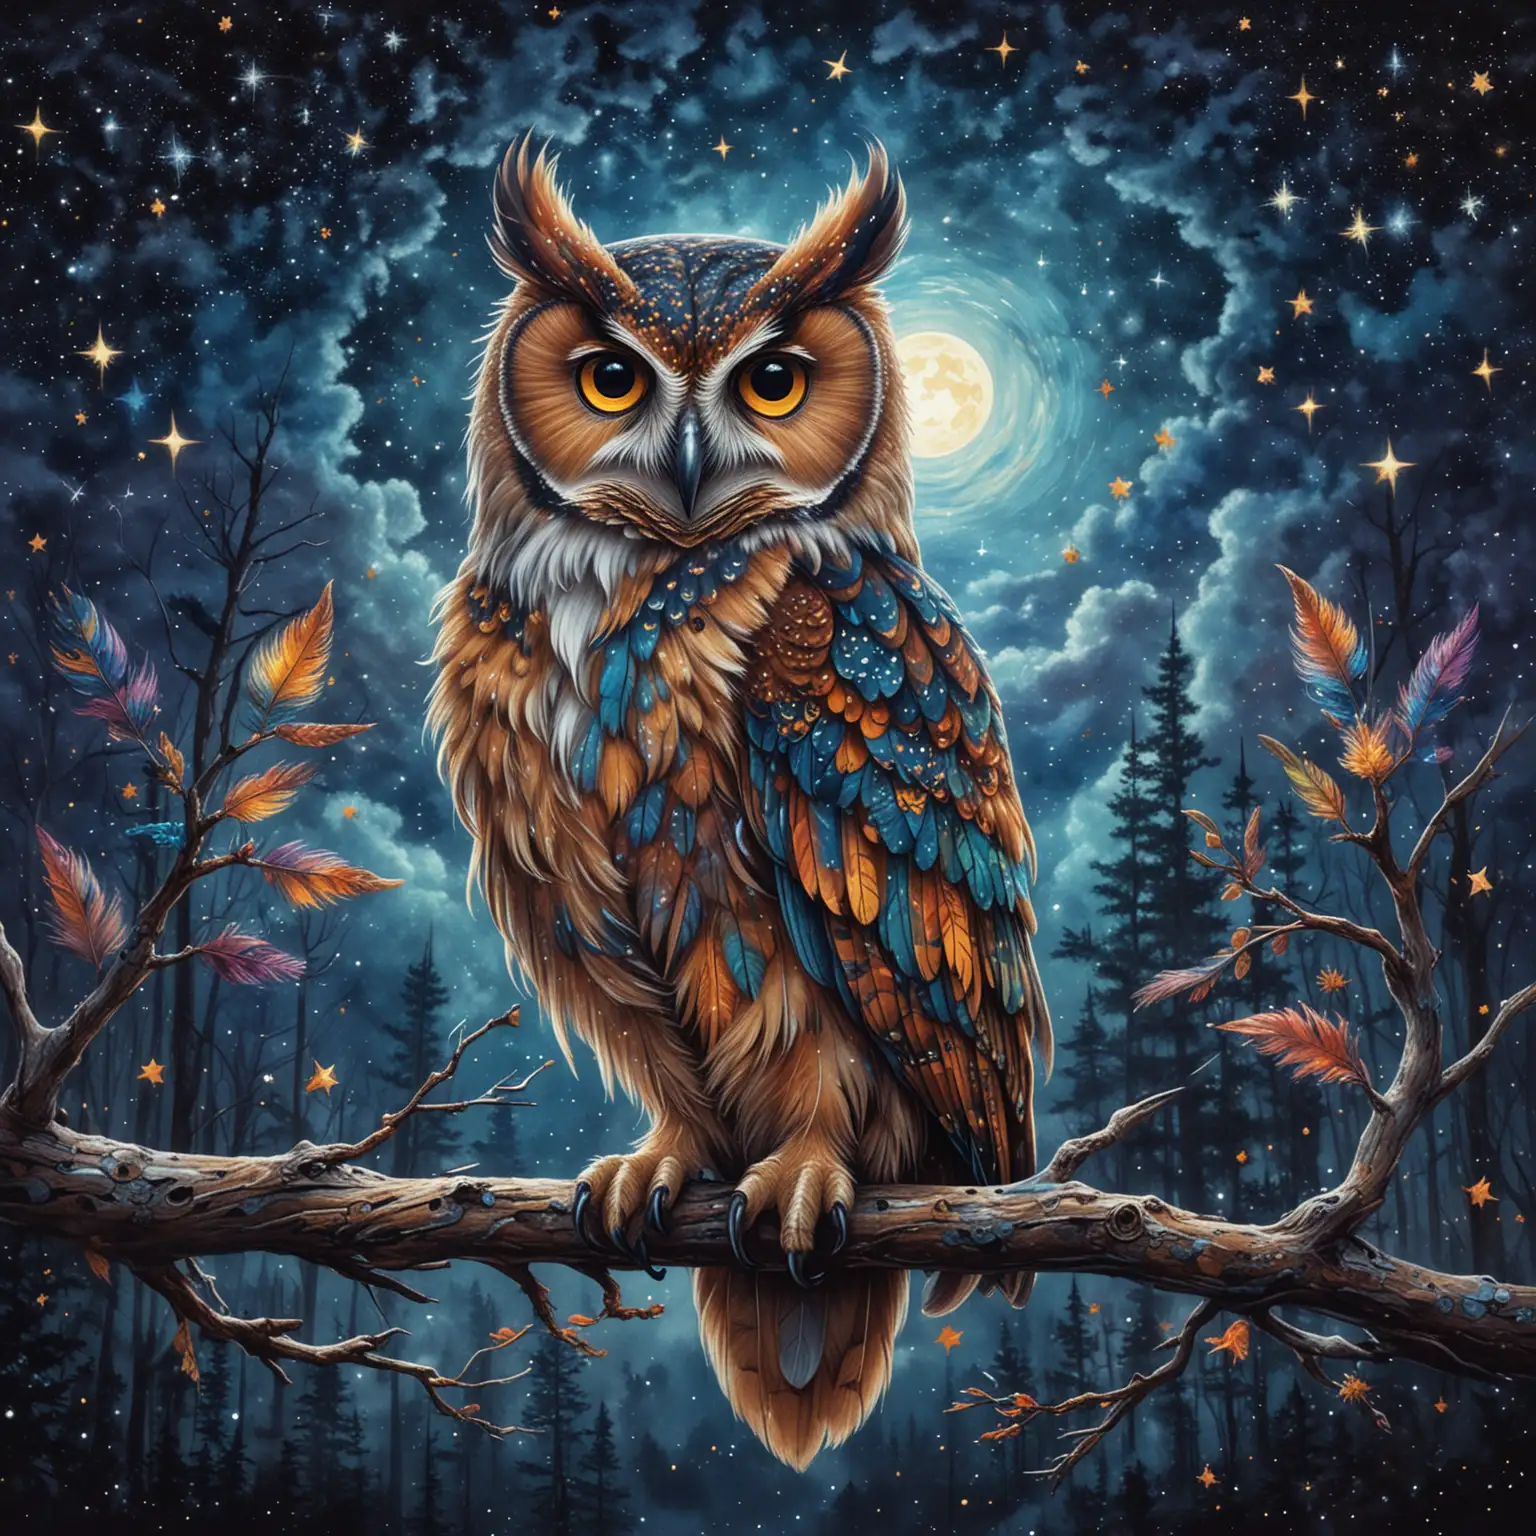 Whimsical Owl Perched on Branch in Enchanted Night Sky